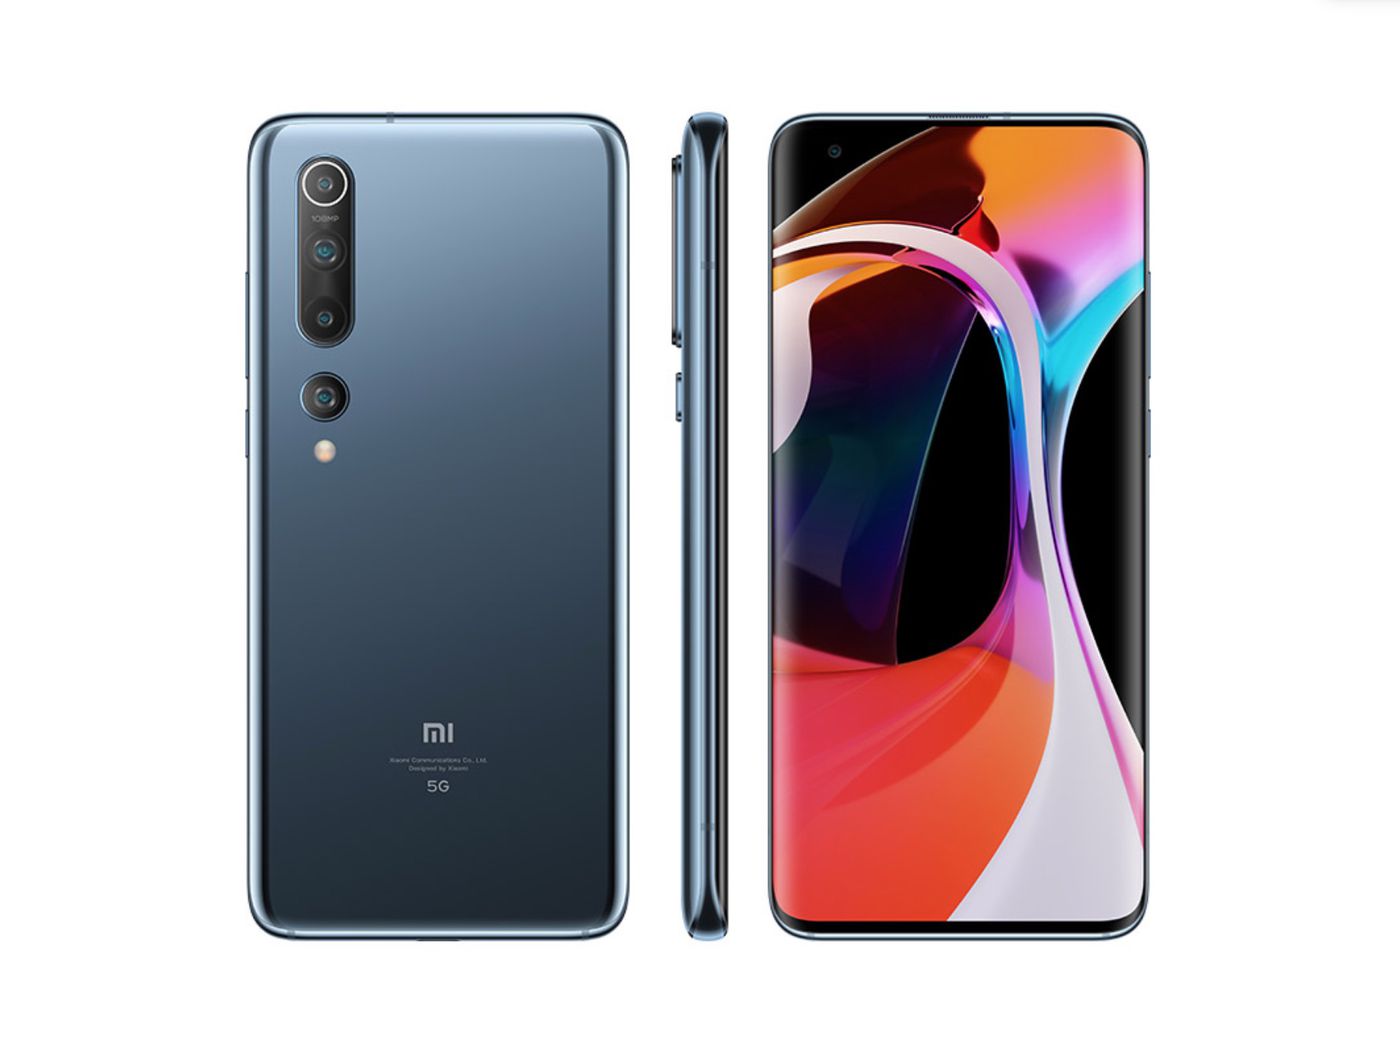 Xiaomi Mi Note 10 Series with 5G Technology Has Launched